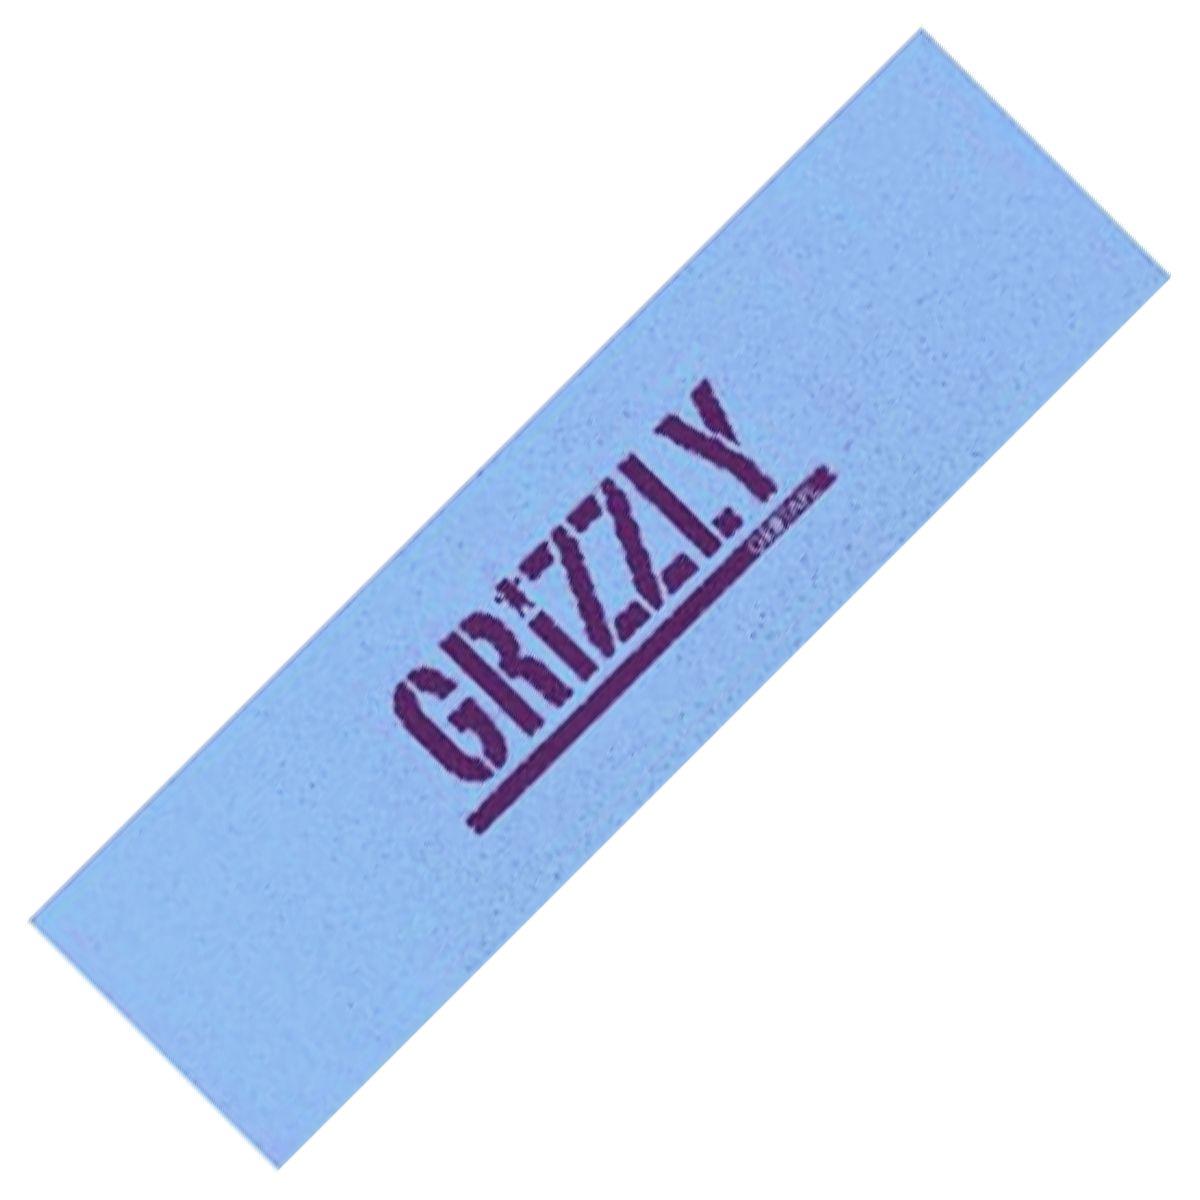 Choice of Color Details about   GRIZZLY Stamp Skateboard GRIPTAPE Grip Tape 9" x 33" NOS